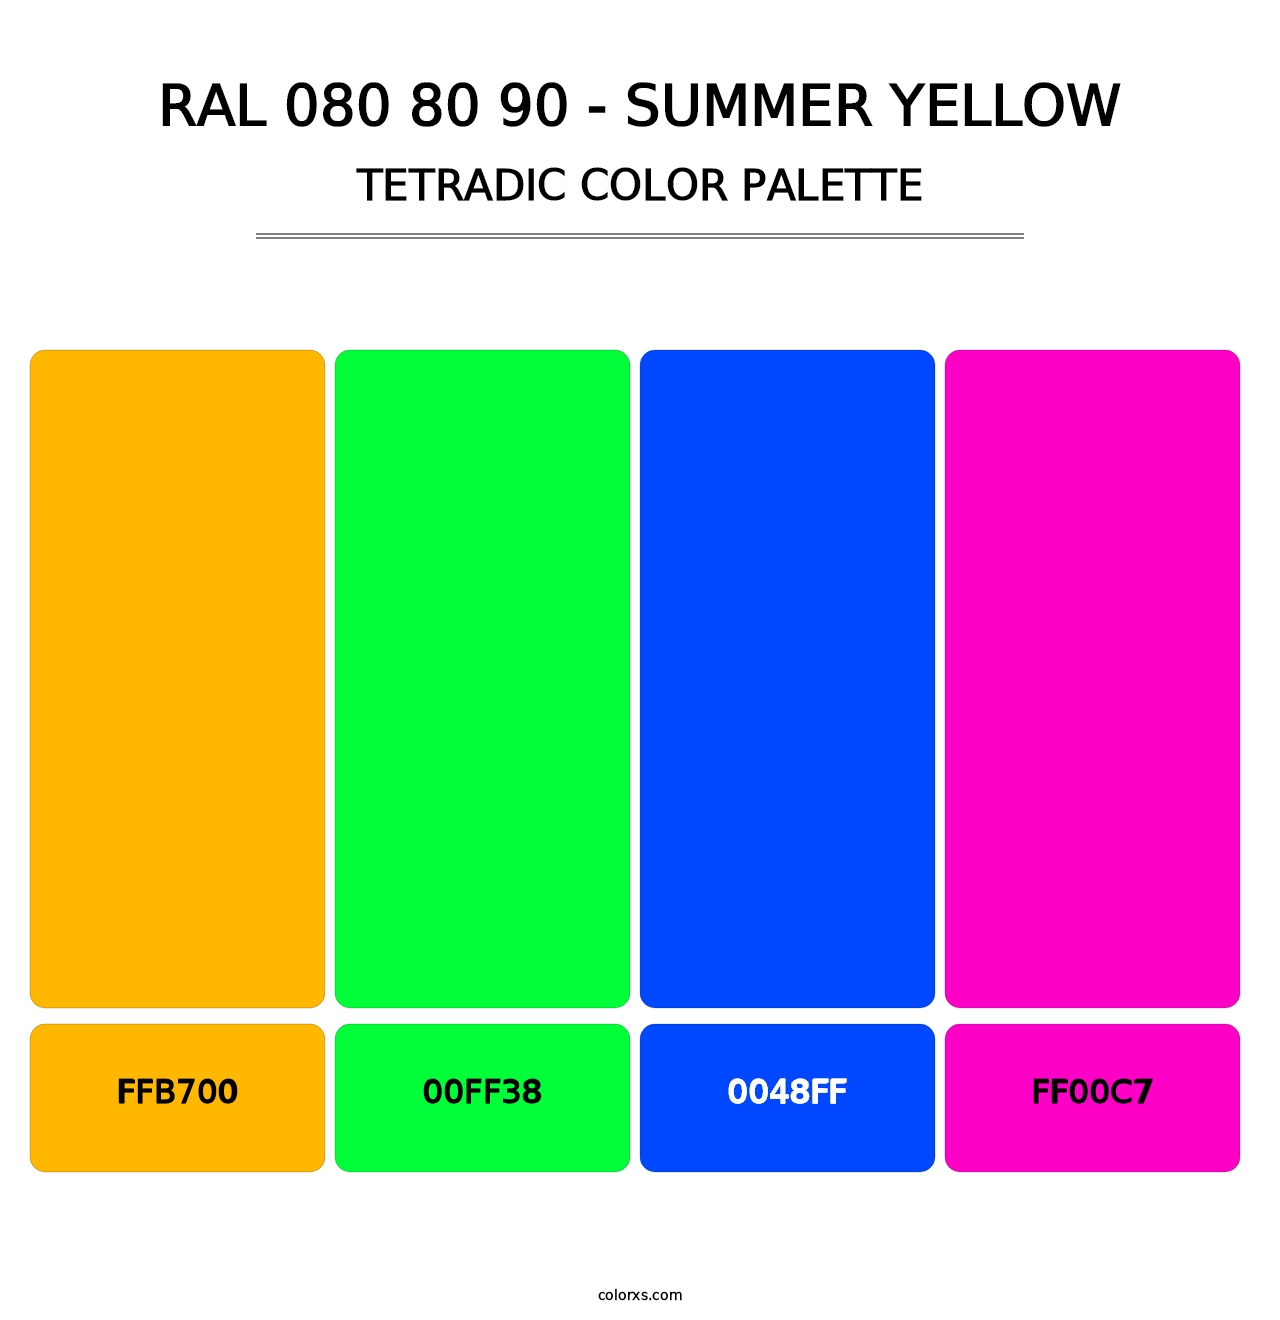 RAL 080 80 90 - Summer Yellow - Tetradic Color Palette